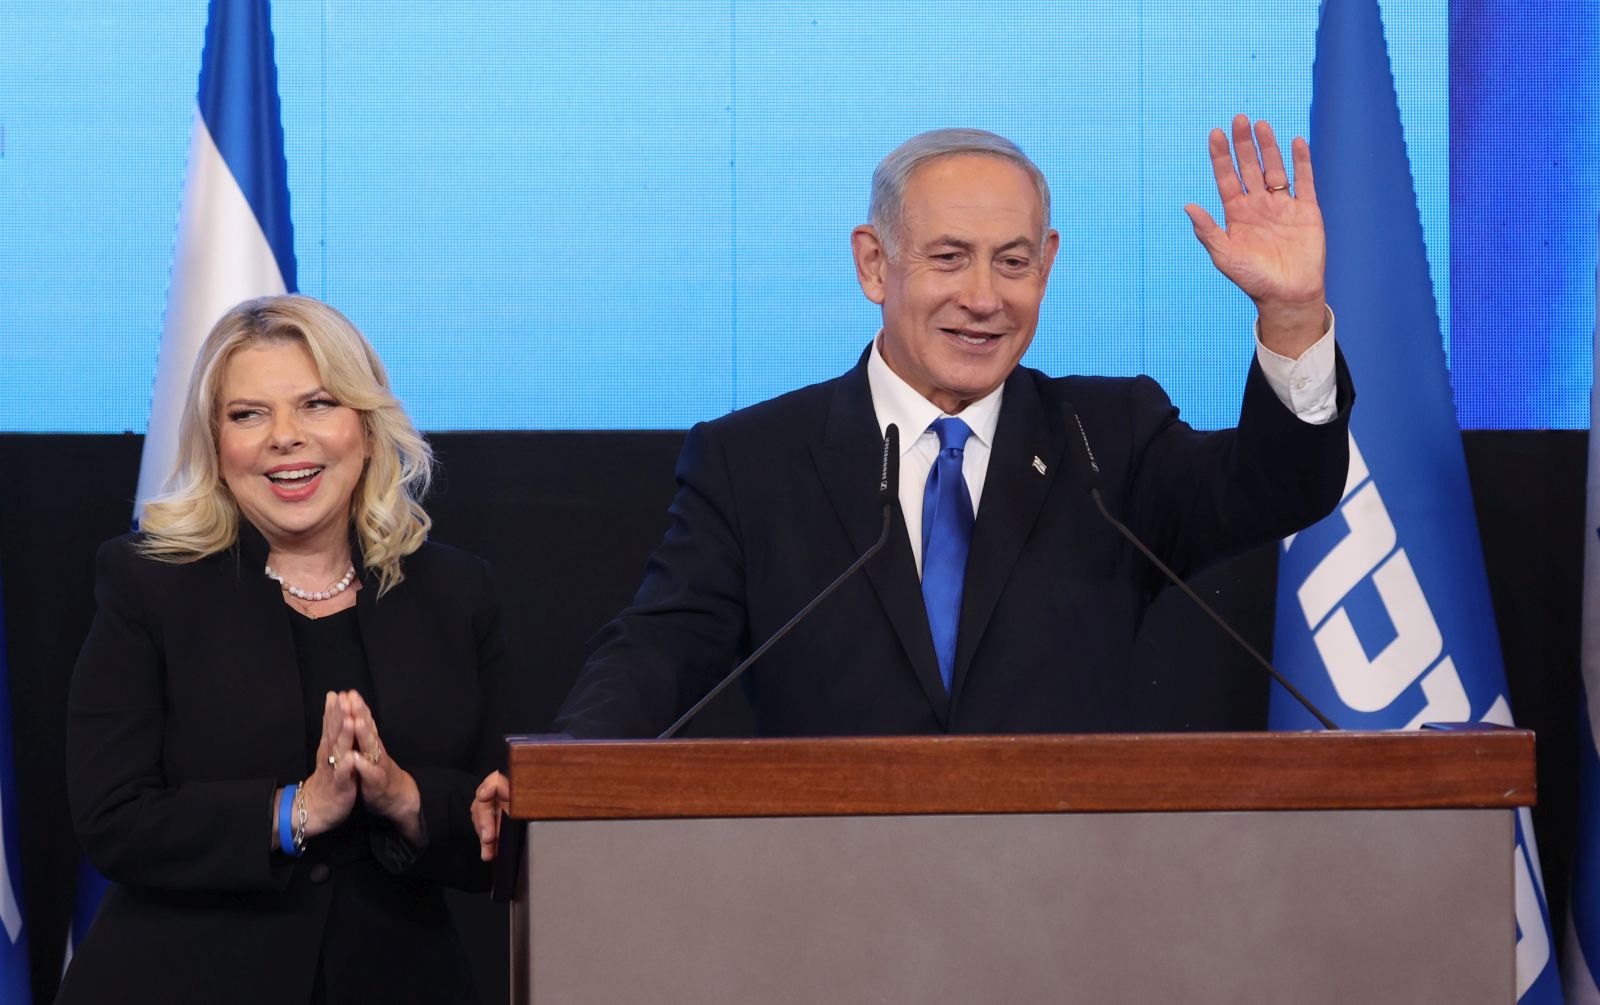 epa10280647 Former Israeli prime minister and leader of the Likud party Benjamin Netanyahu (R) speaks as his wife Sara (L) looks on at the Likud party final election event in Jerusalem, Israel, 01 November 2022.  EPA/ABIR SULTAN